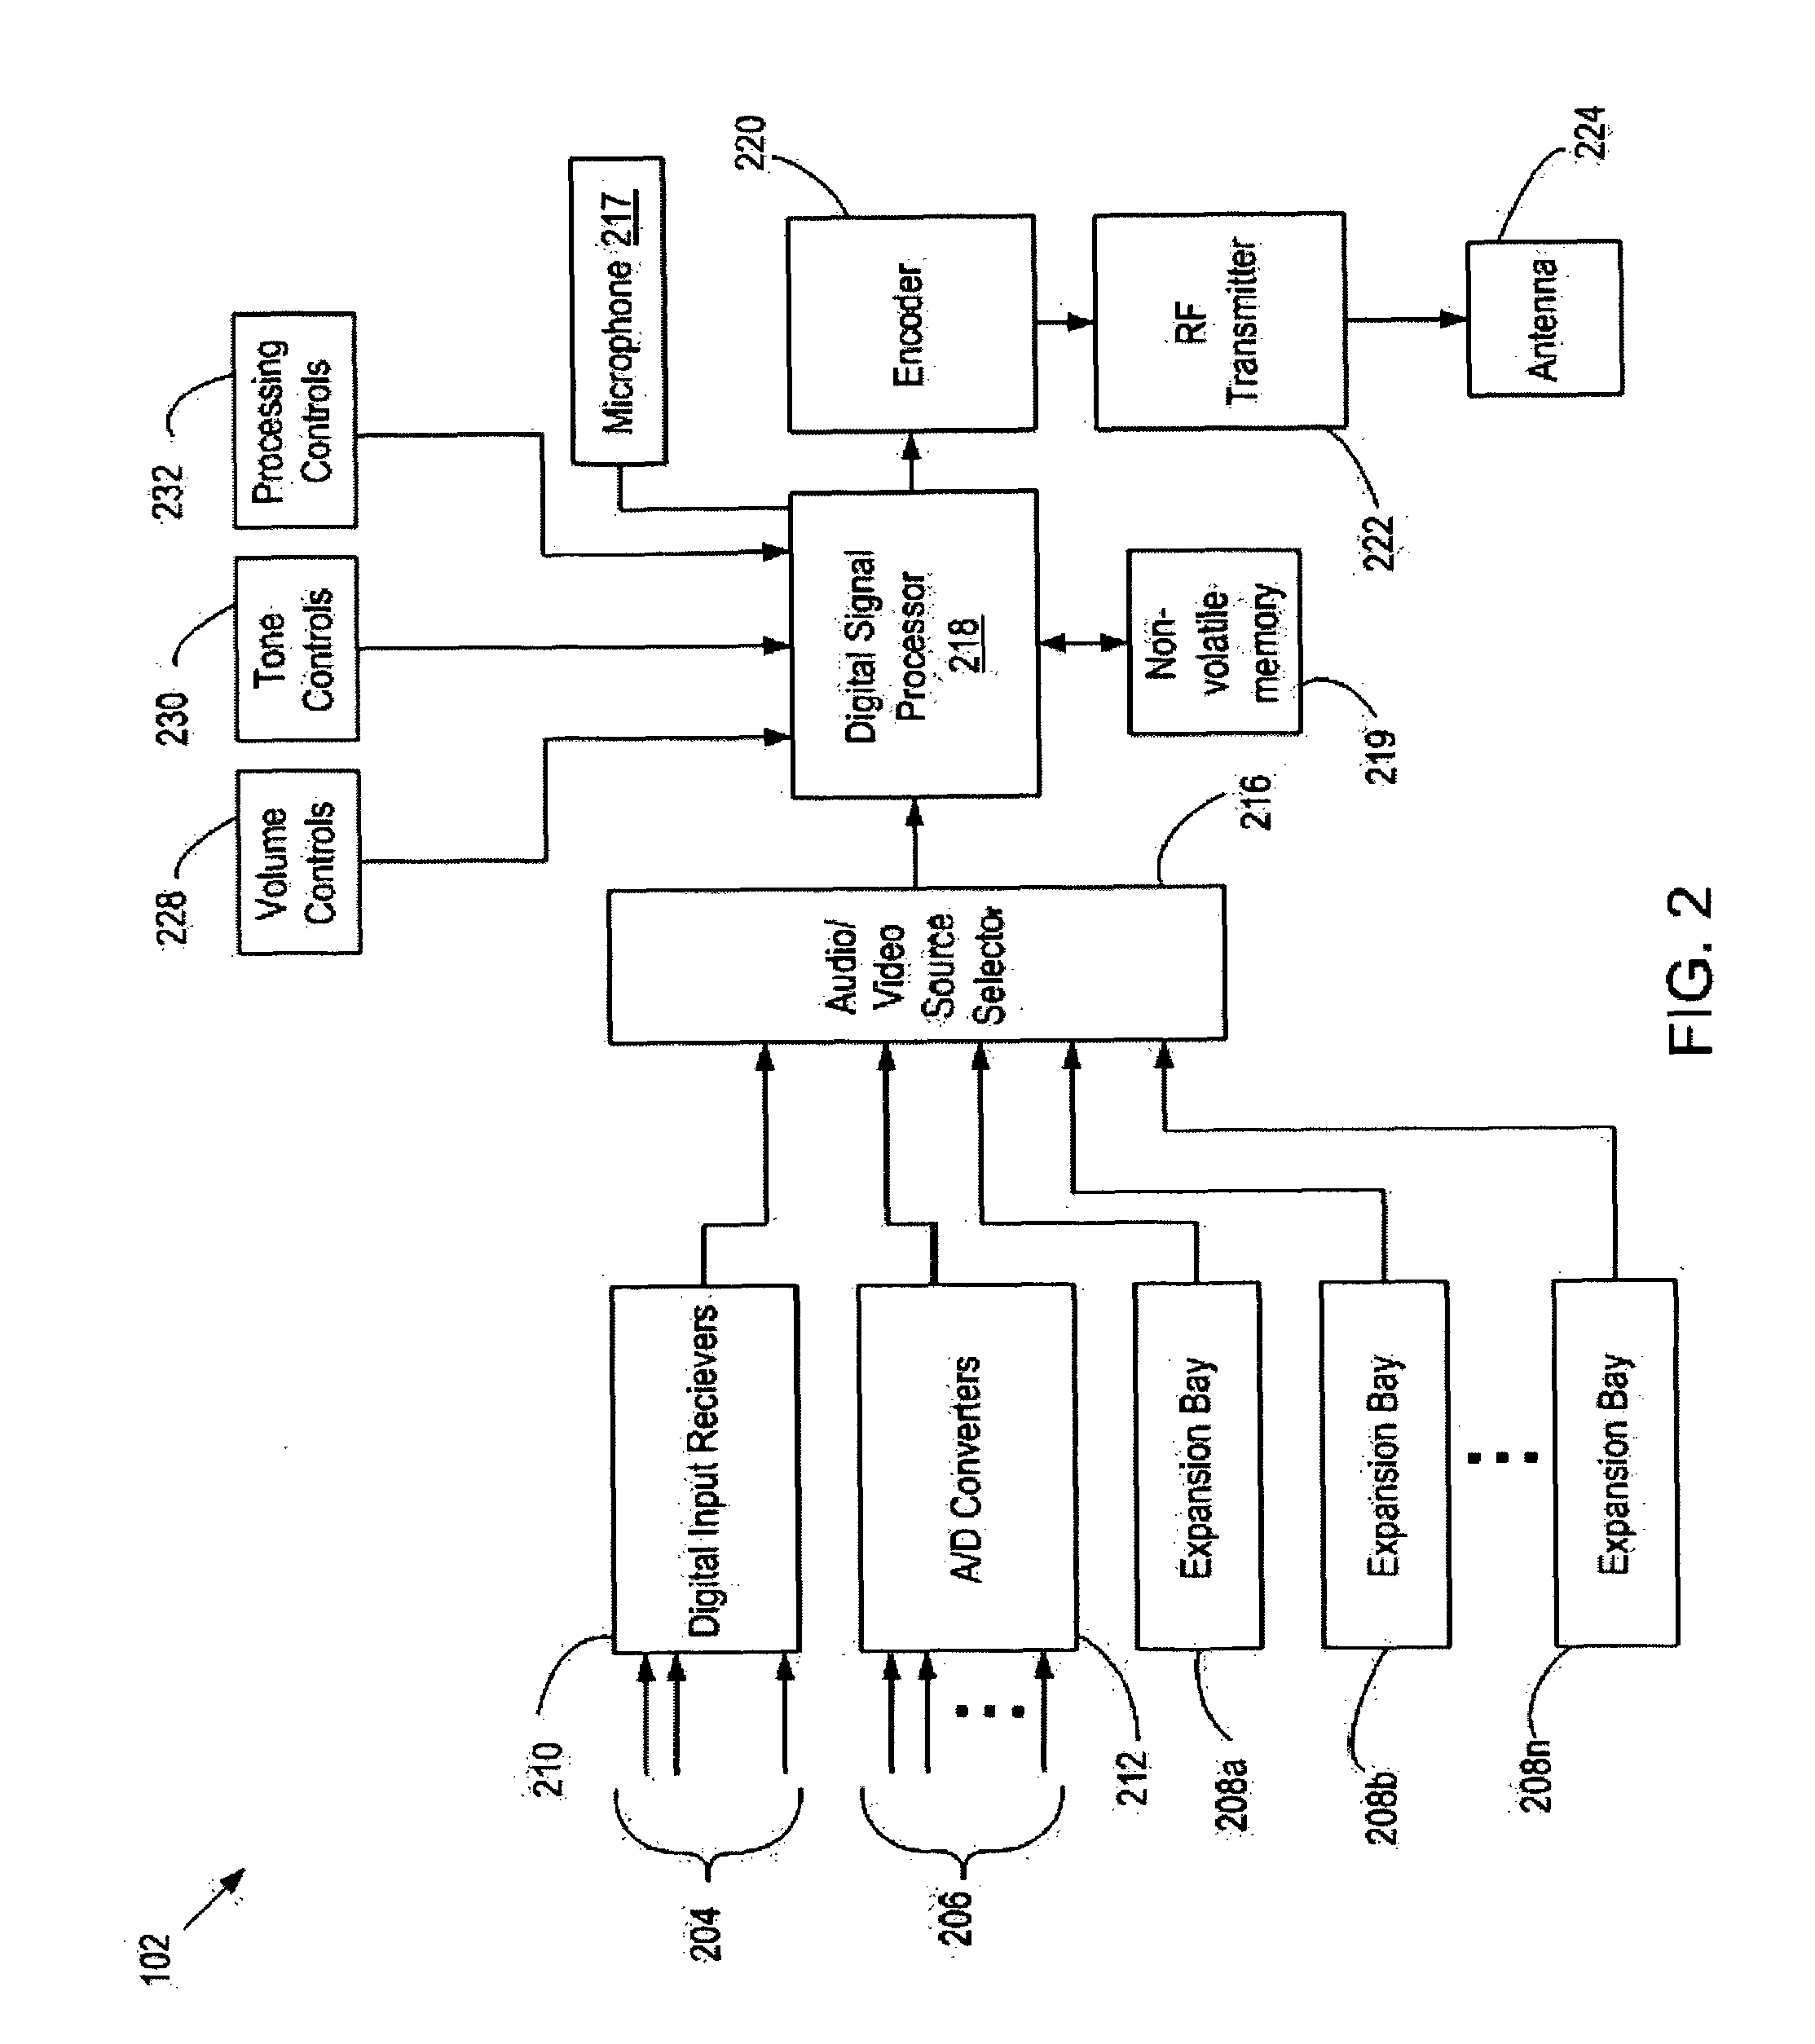 Method and apparatus for wireless digital audio playback for player piano applications